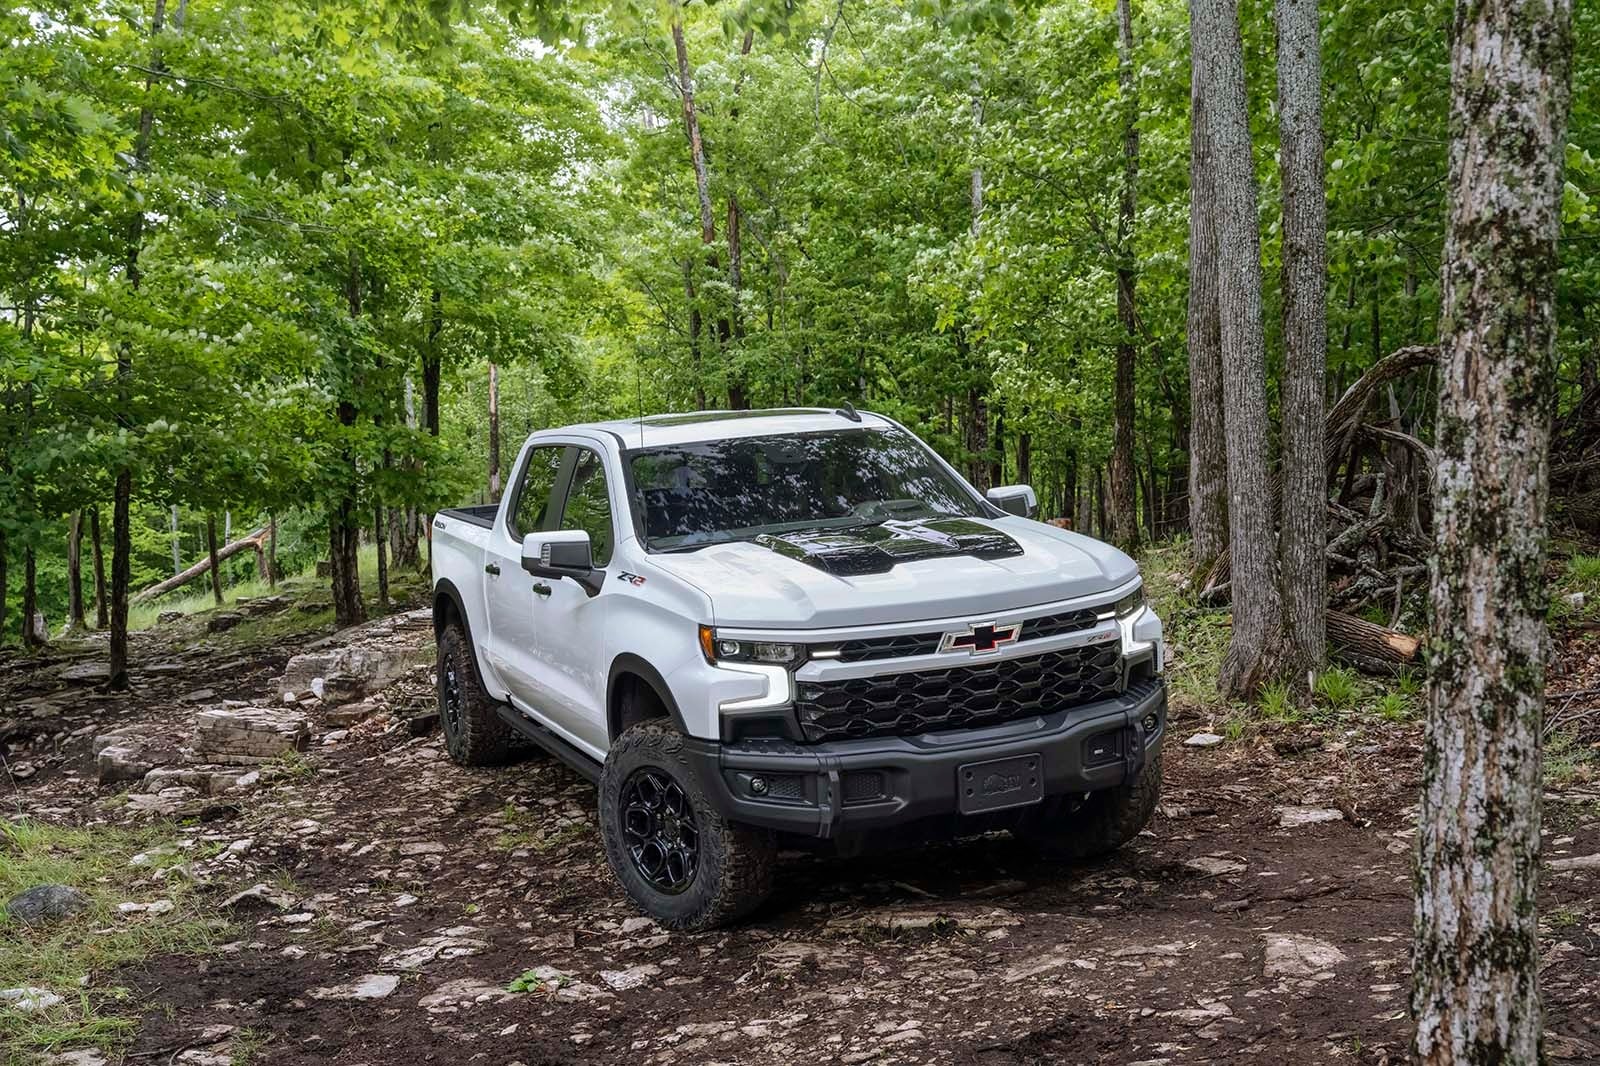 2023 Chevrolet Silverado 1500 Adds a More Potent Diesel Engine and Range-Topping ZR2 Bison